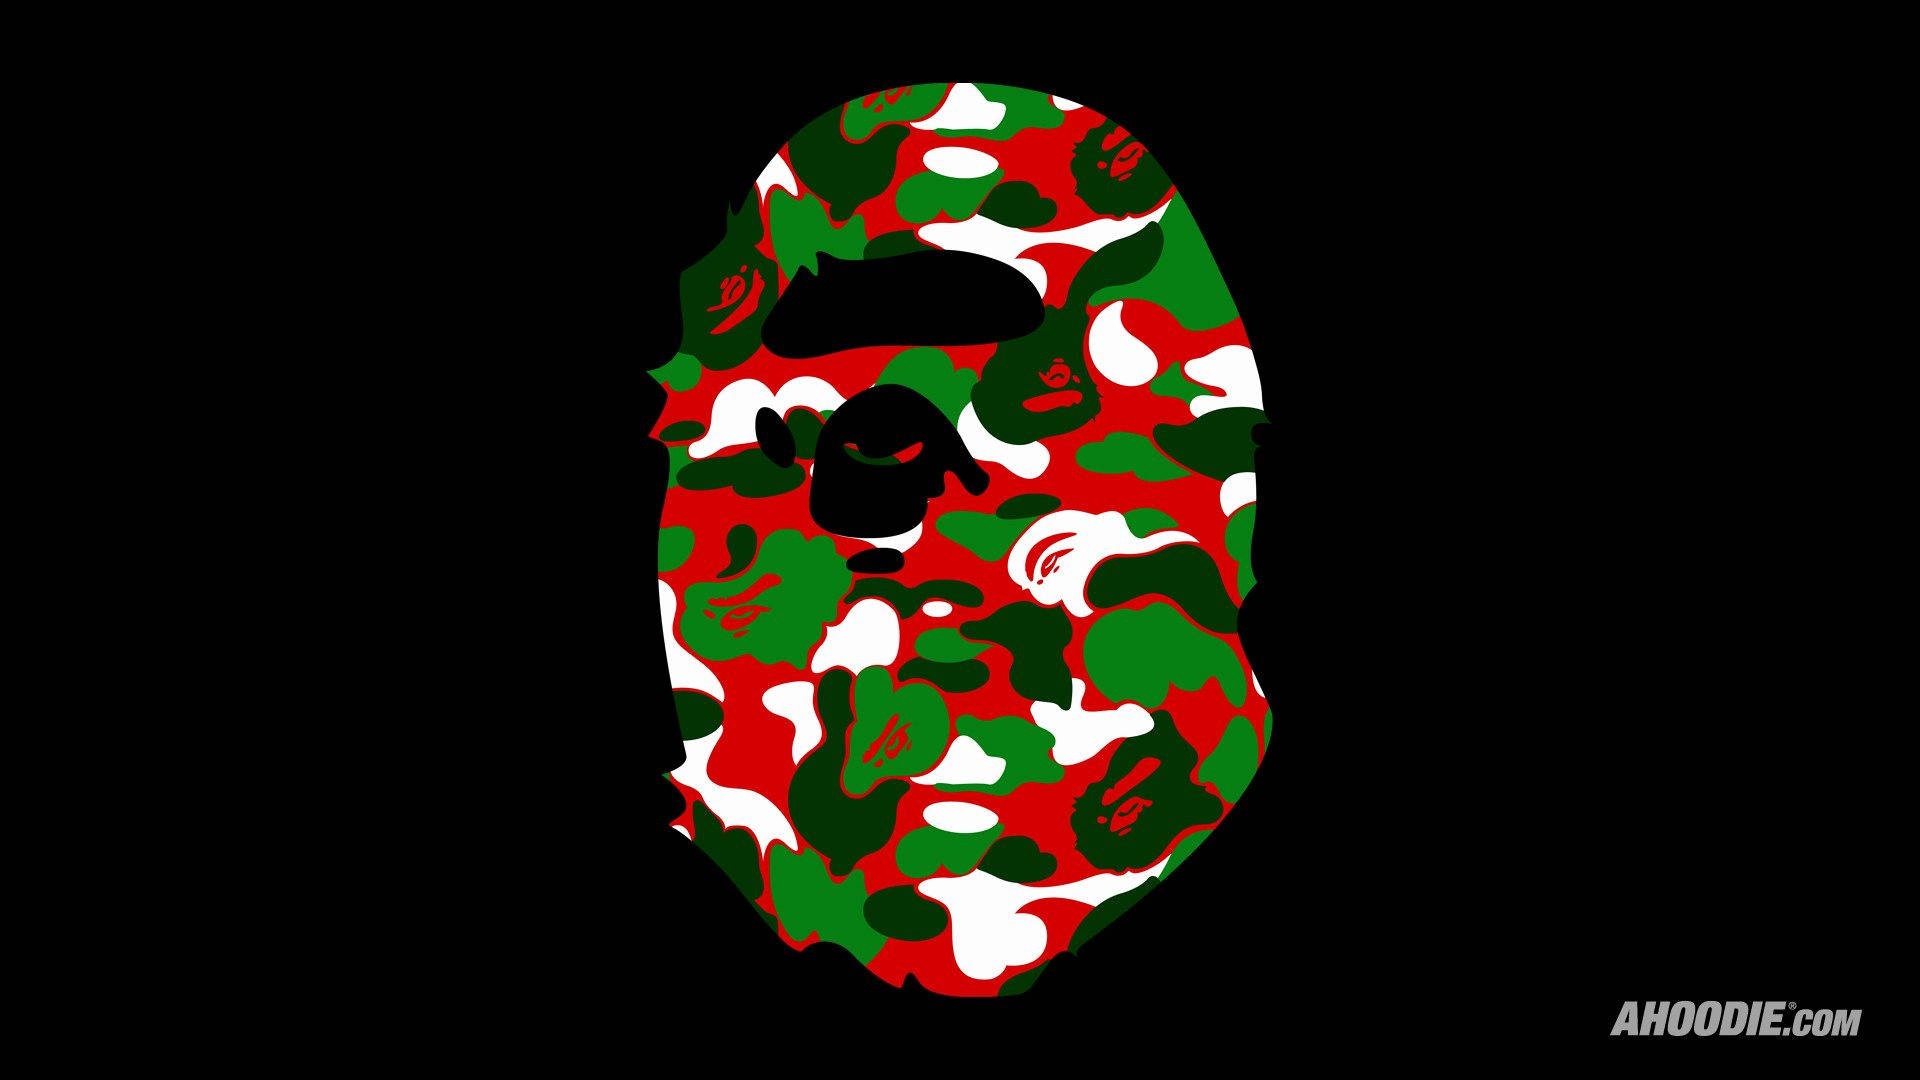 Bape Logo In Red And Green Camo Background